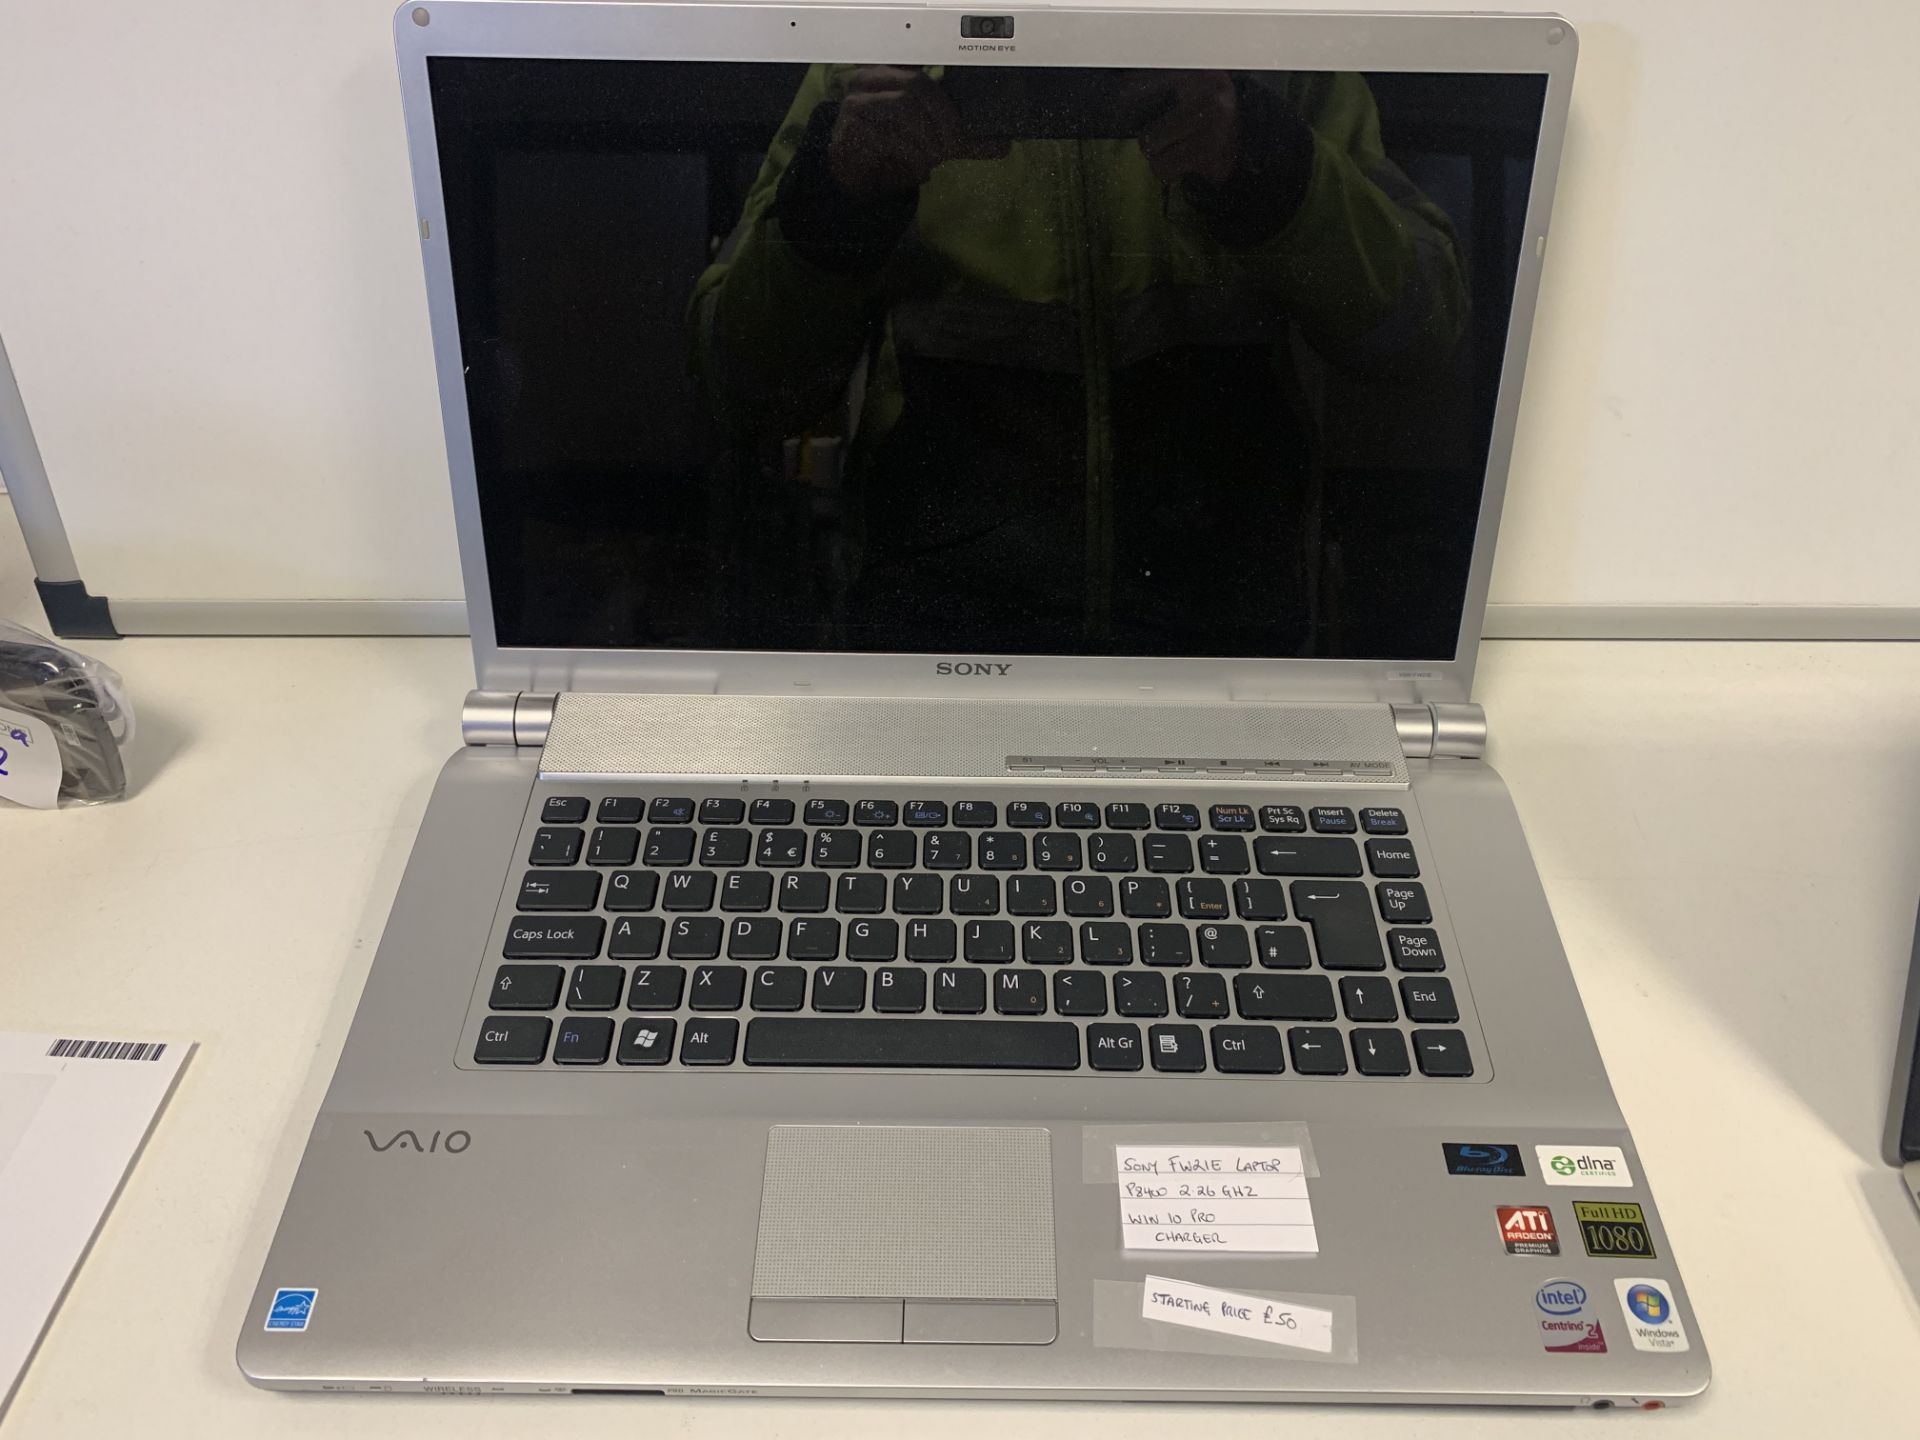 SONY FW21E LAPTOP, P8400 2.26GHZ, WIN 10 PRO WITH CHARGER